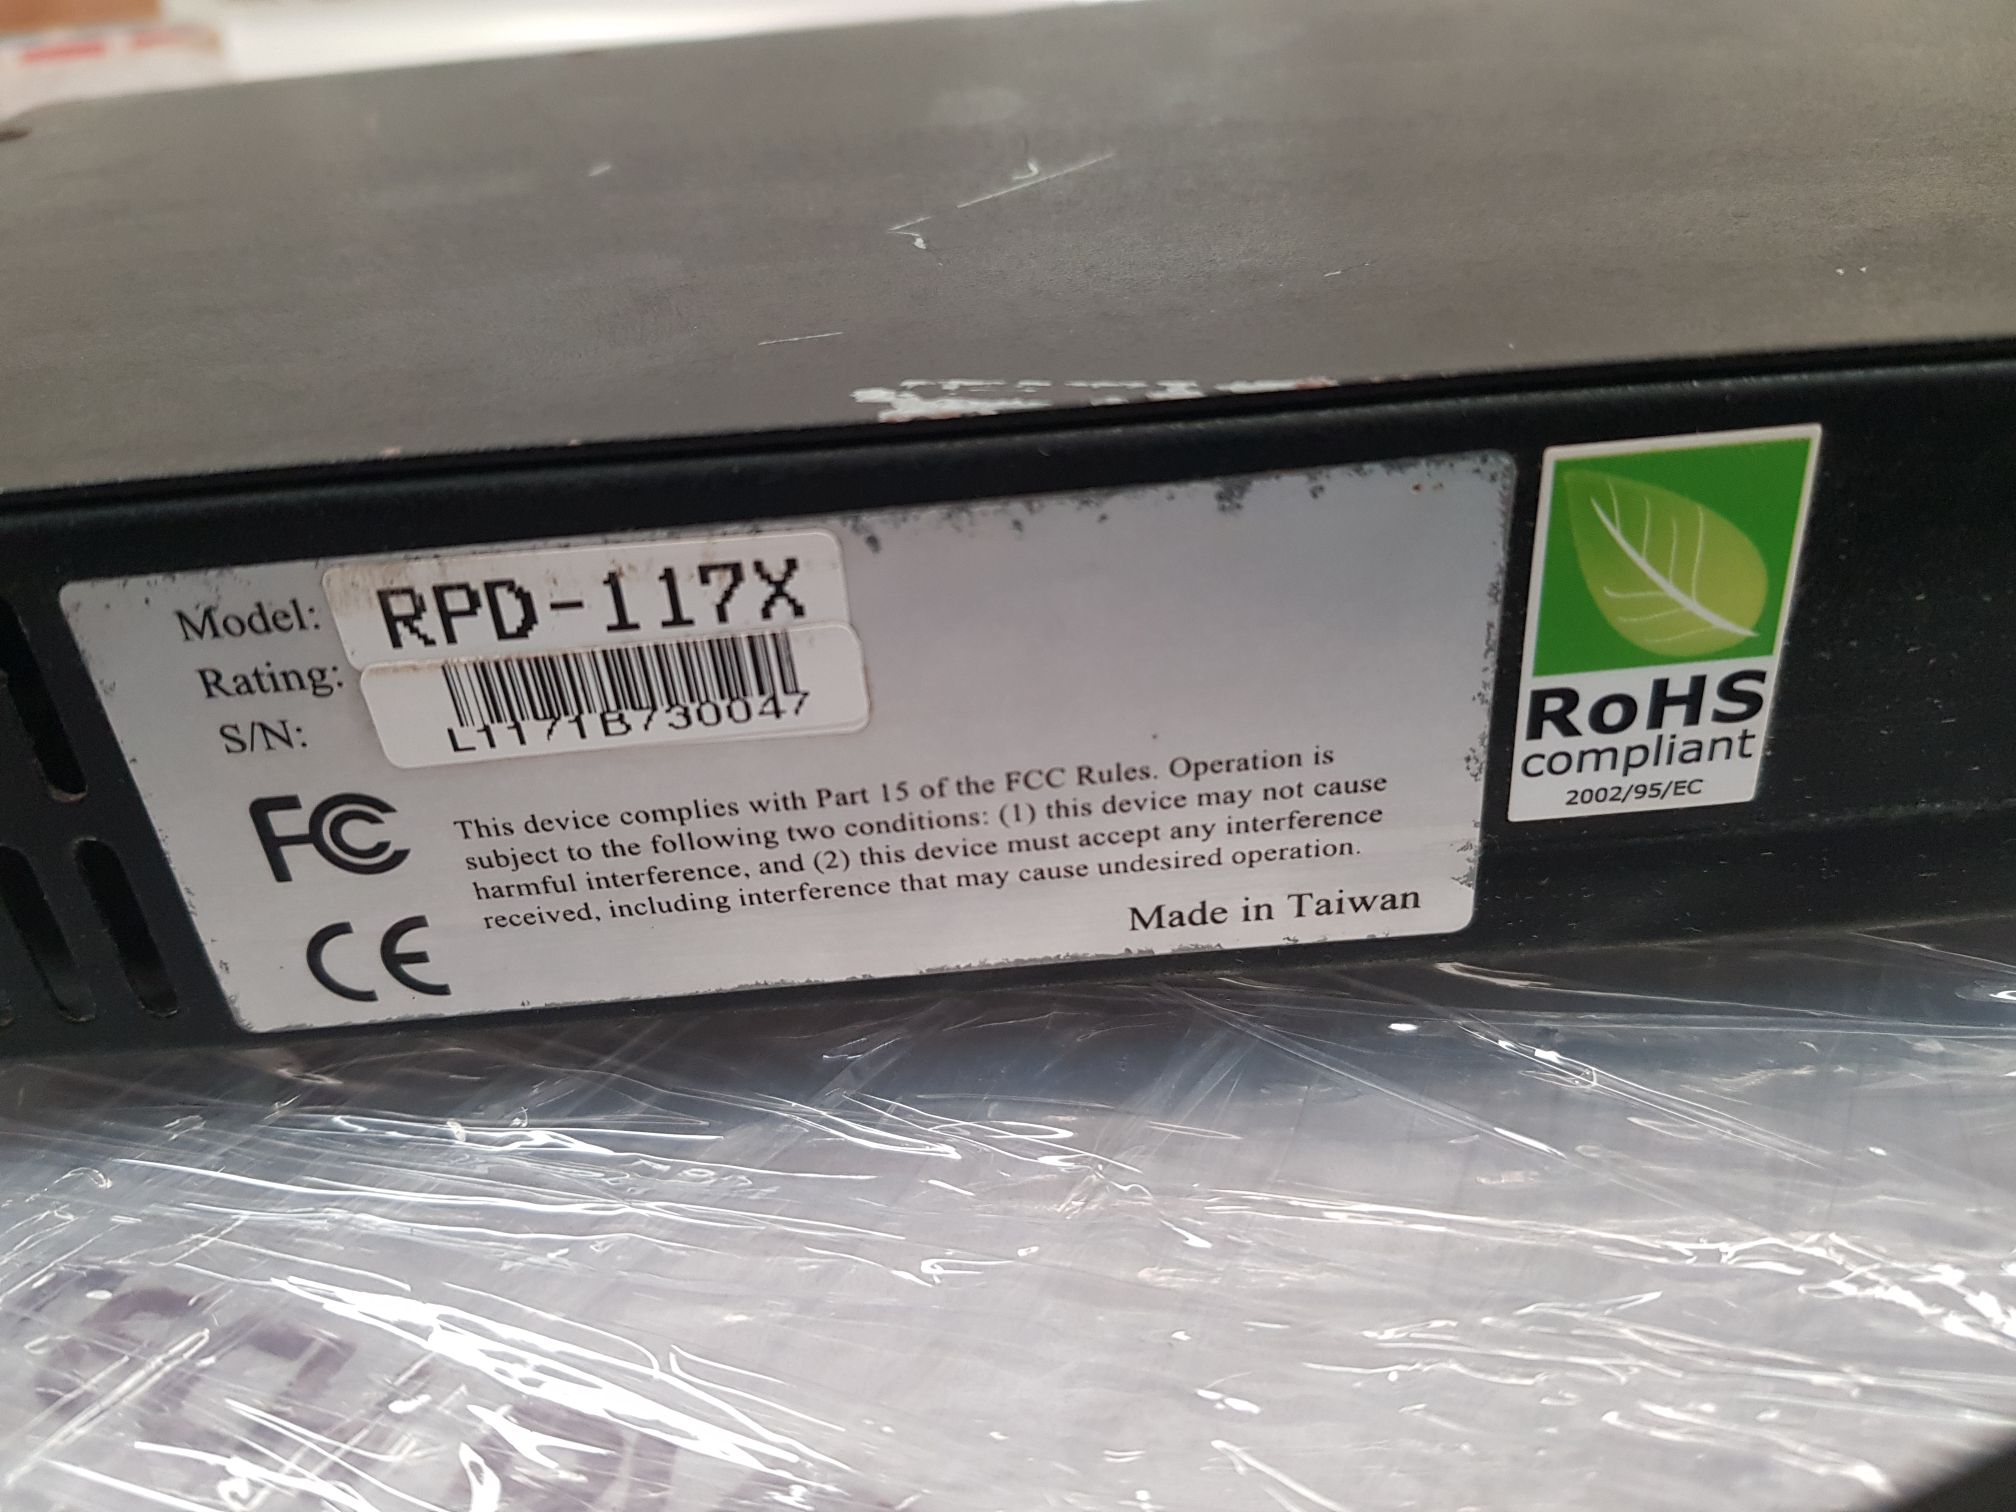 RPD-117X LCD DISPLAY AND KVM SWITCH